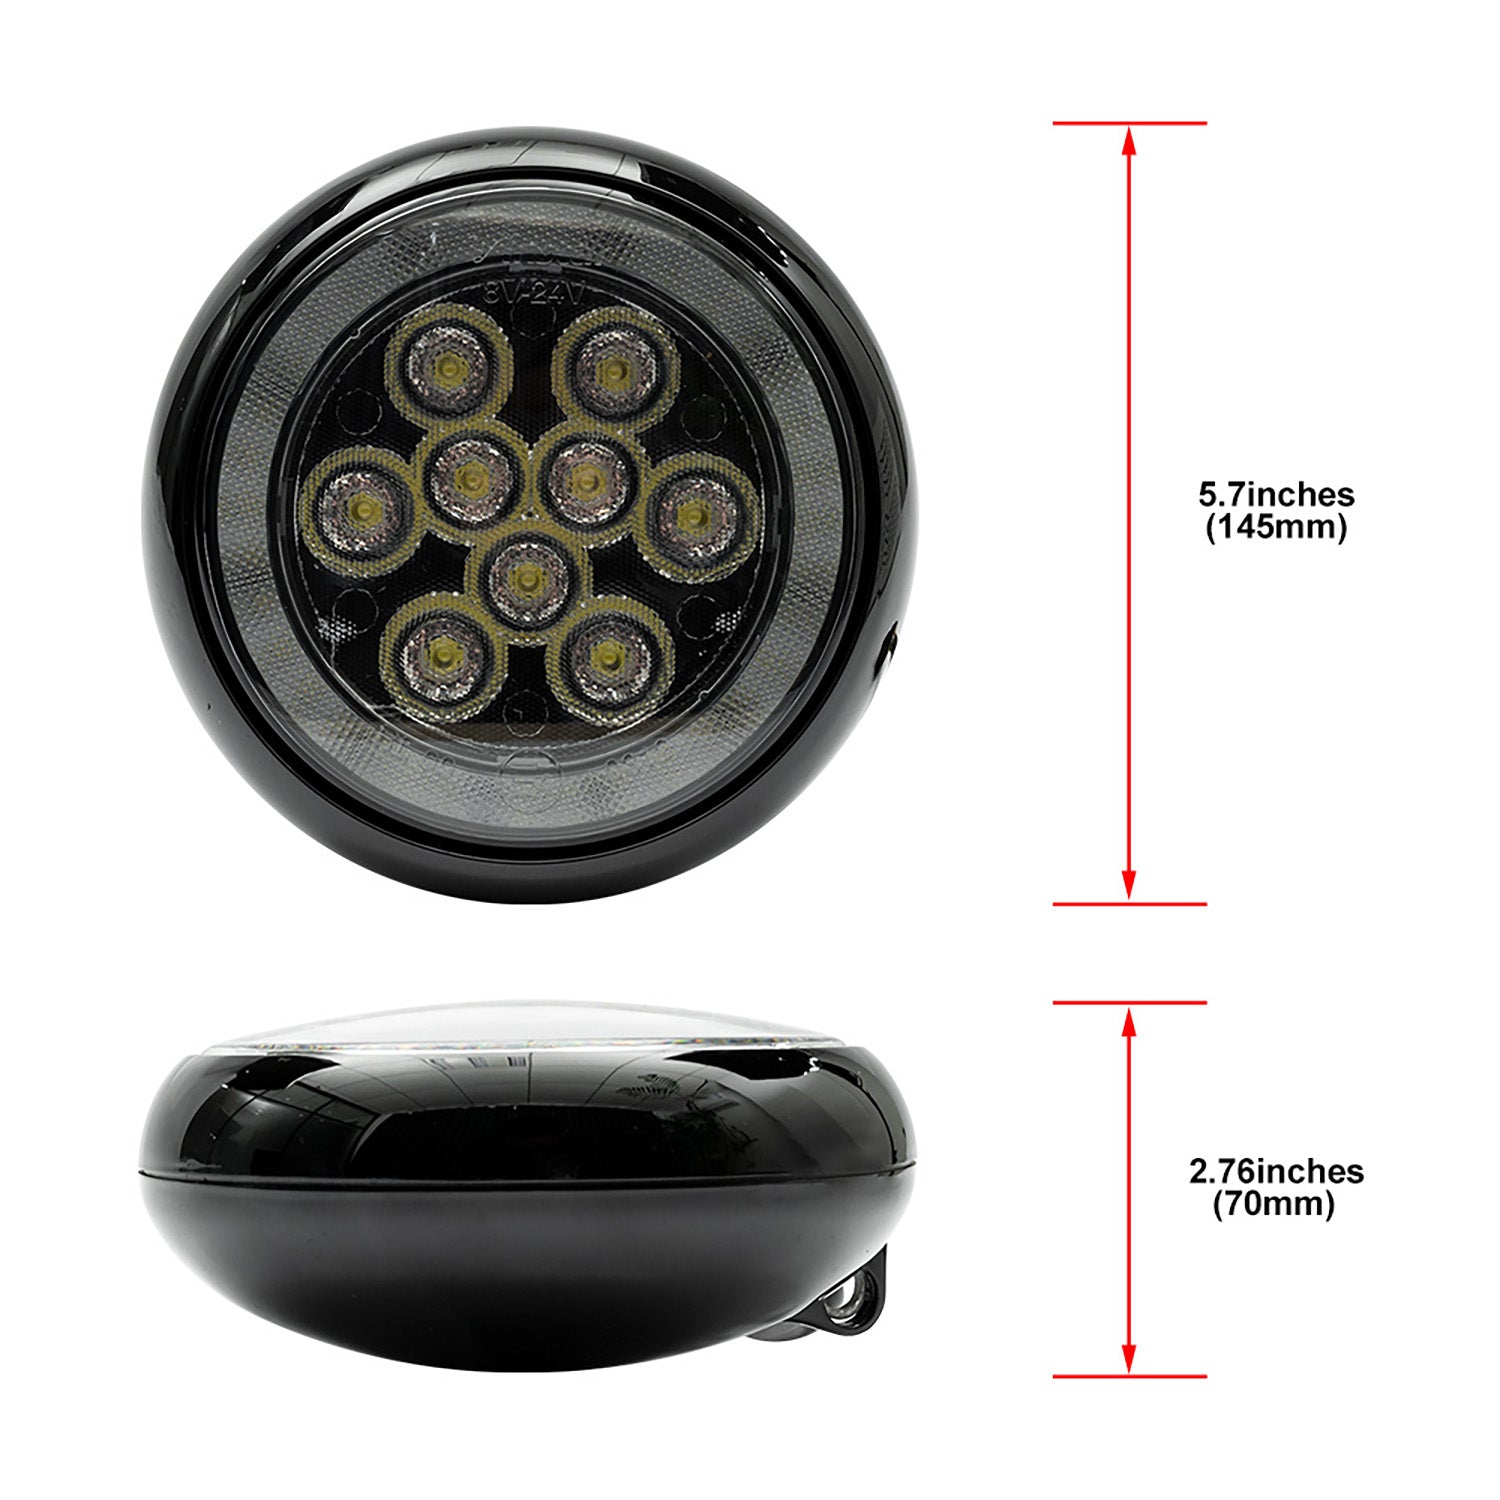 Black Finish LED Halo Rally Driving Lights For Mini R60 R61